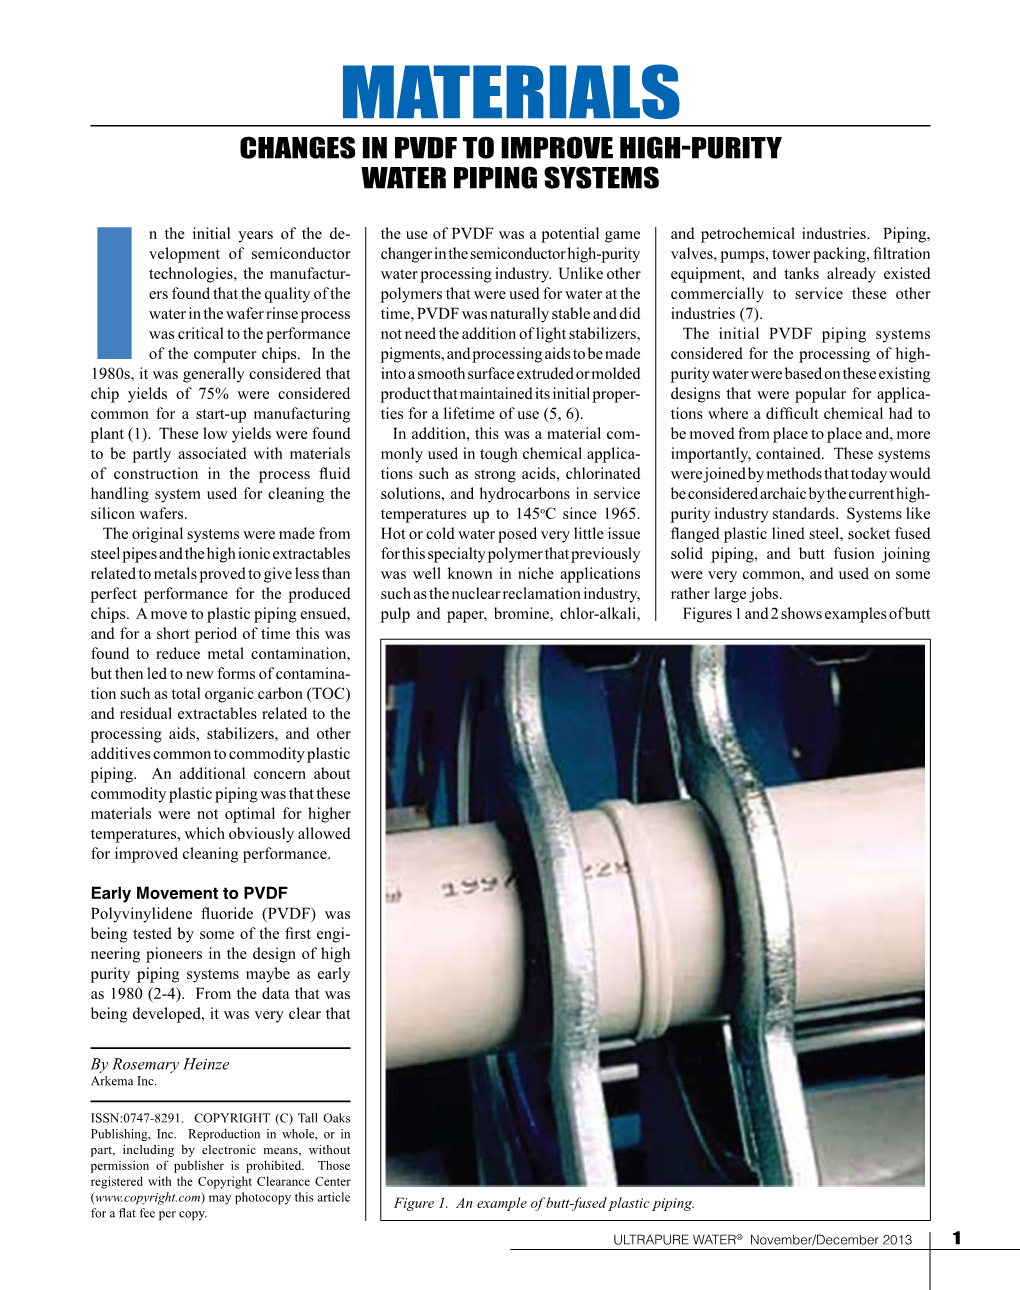 Materials Changes in PVDF to Improve High-Purity Water Piping Systems